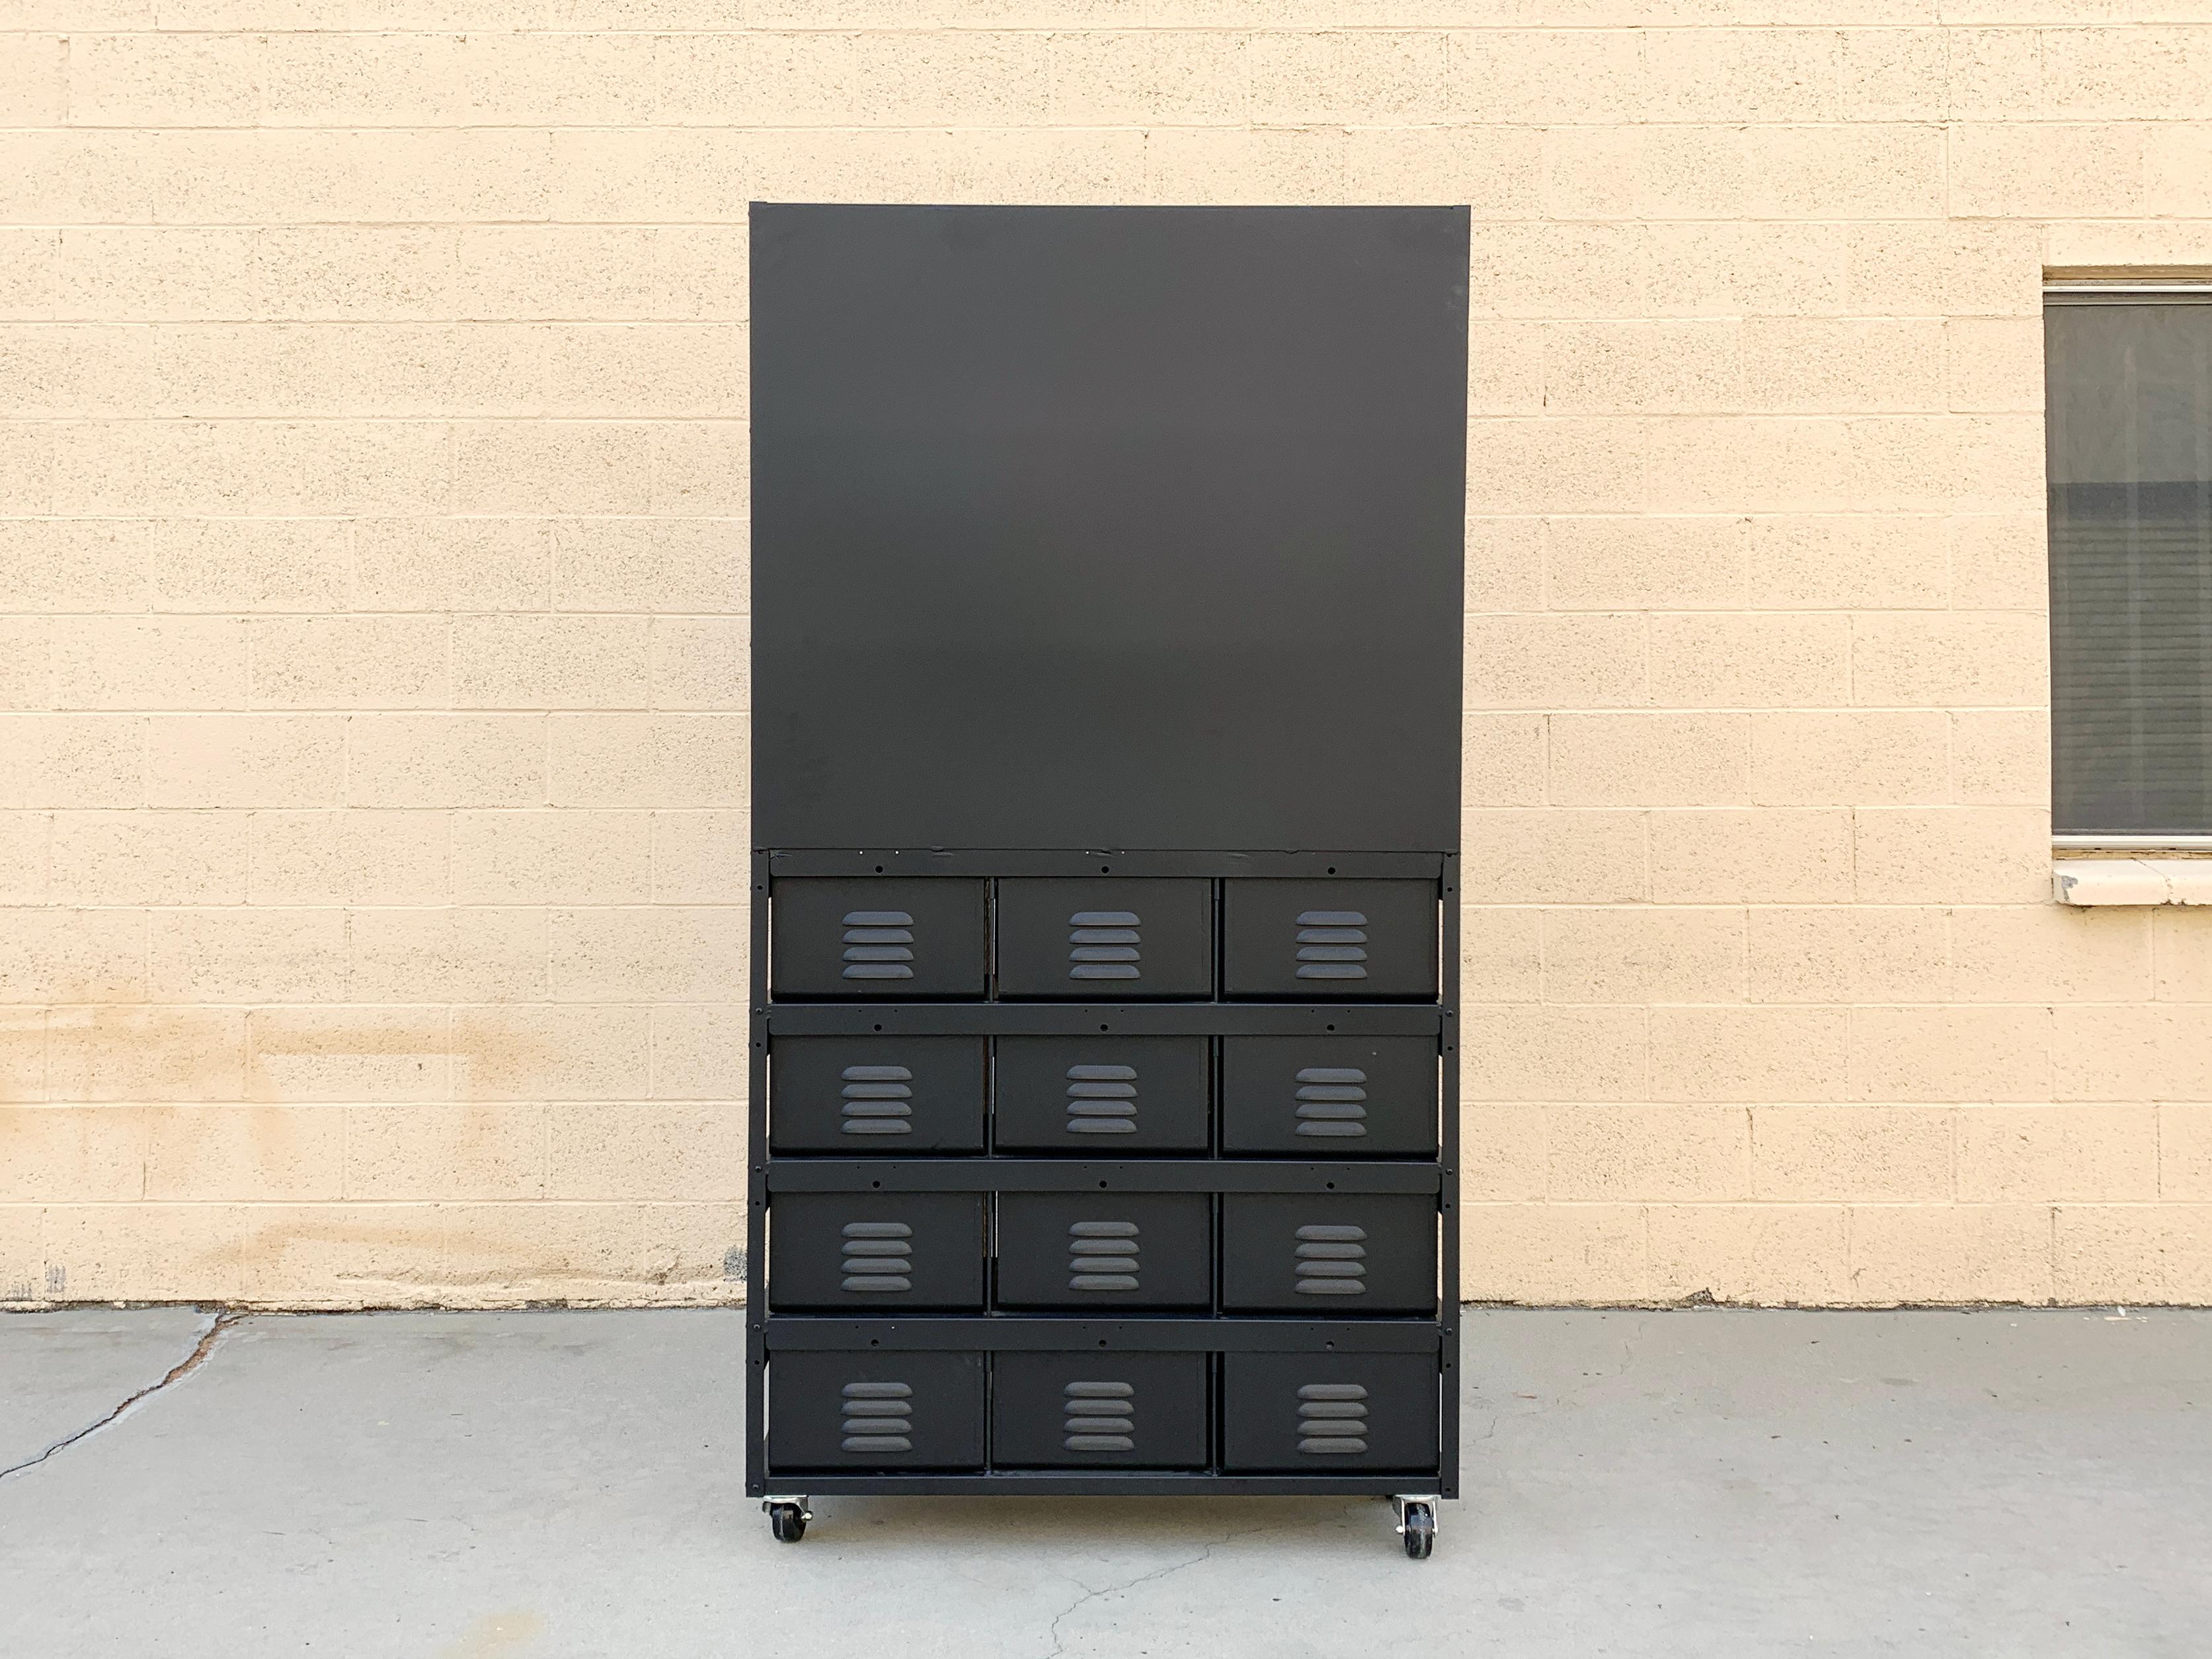 Custom 3 x 4 Locker Basket Unit on Casters with Three Shelves, Matte Black In Excellent Condition For Sale In Alhambra, CA